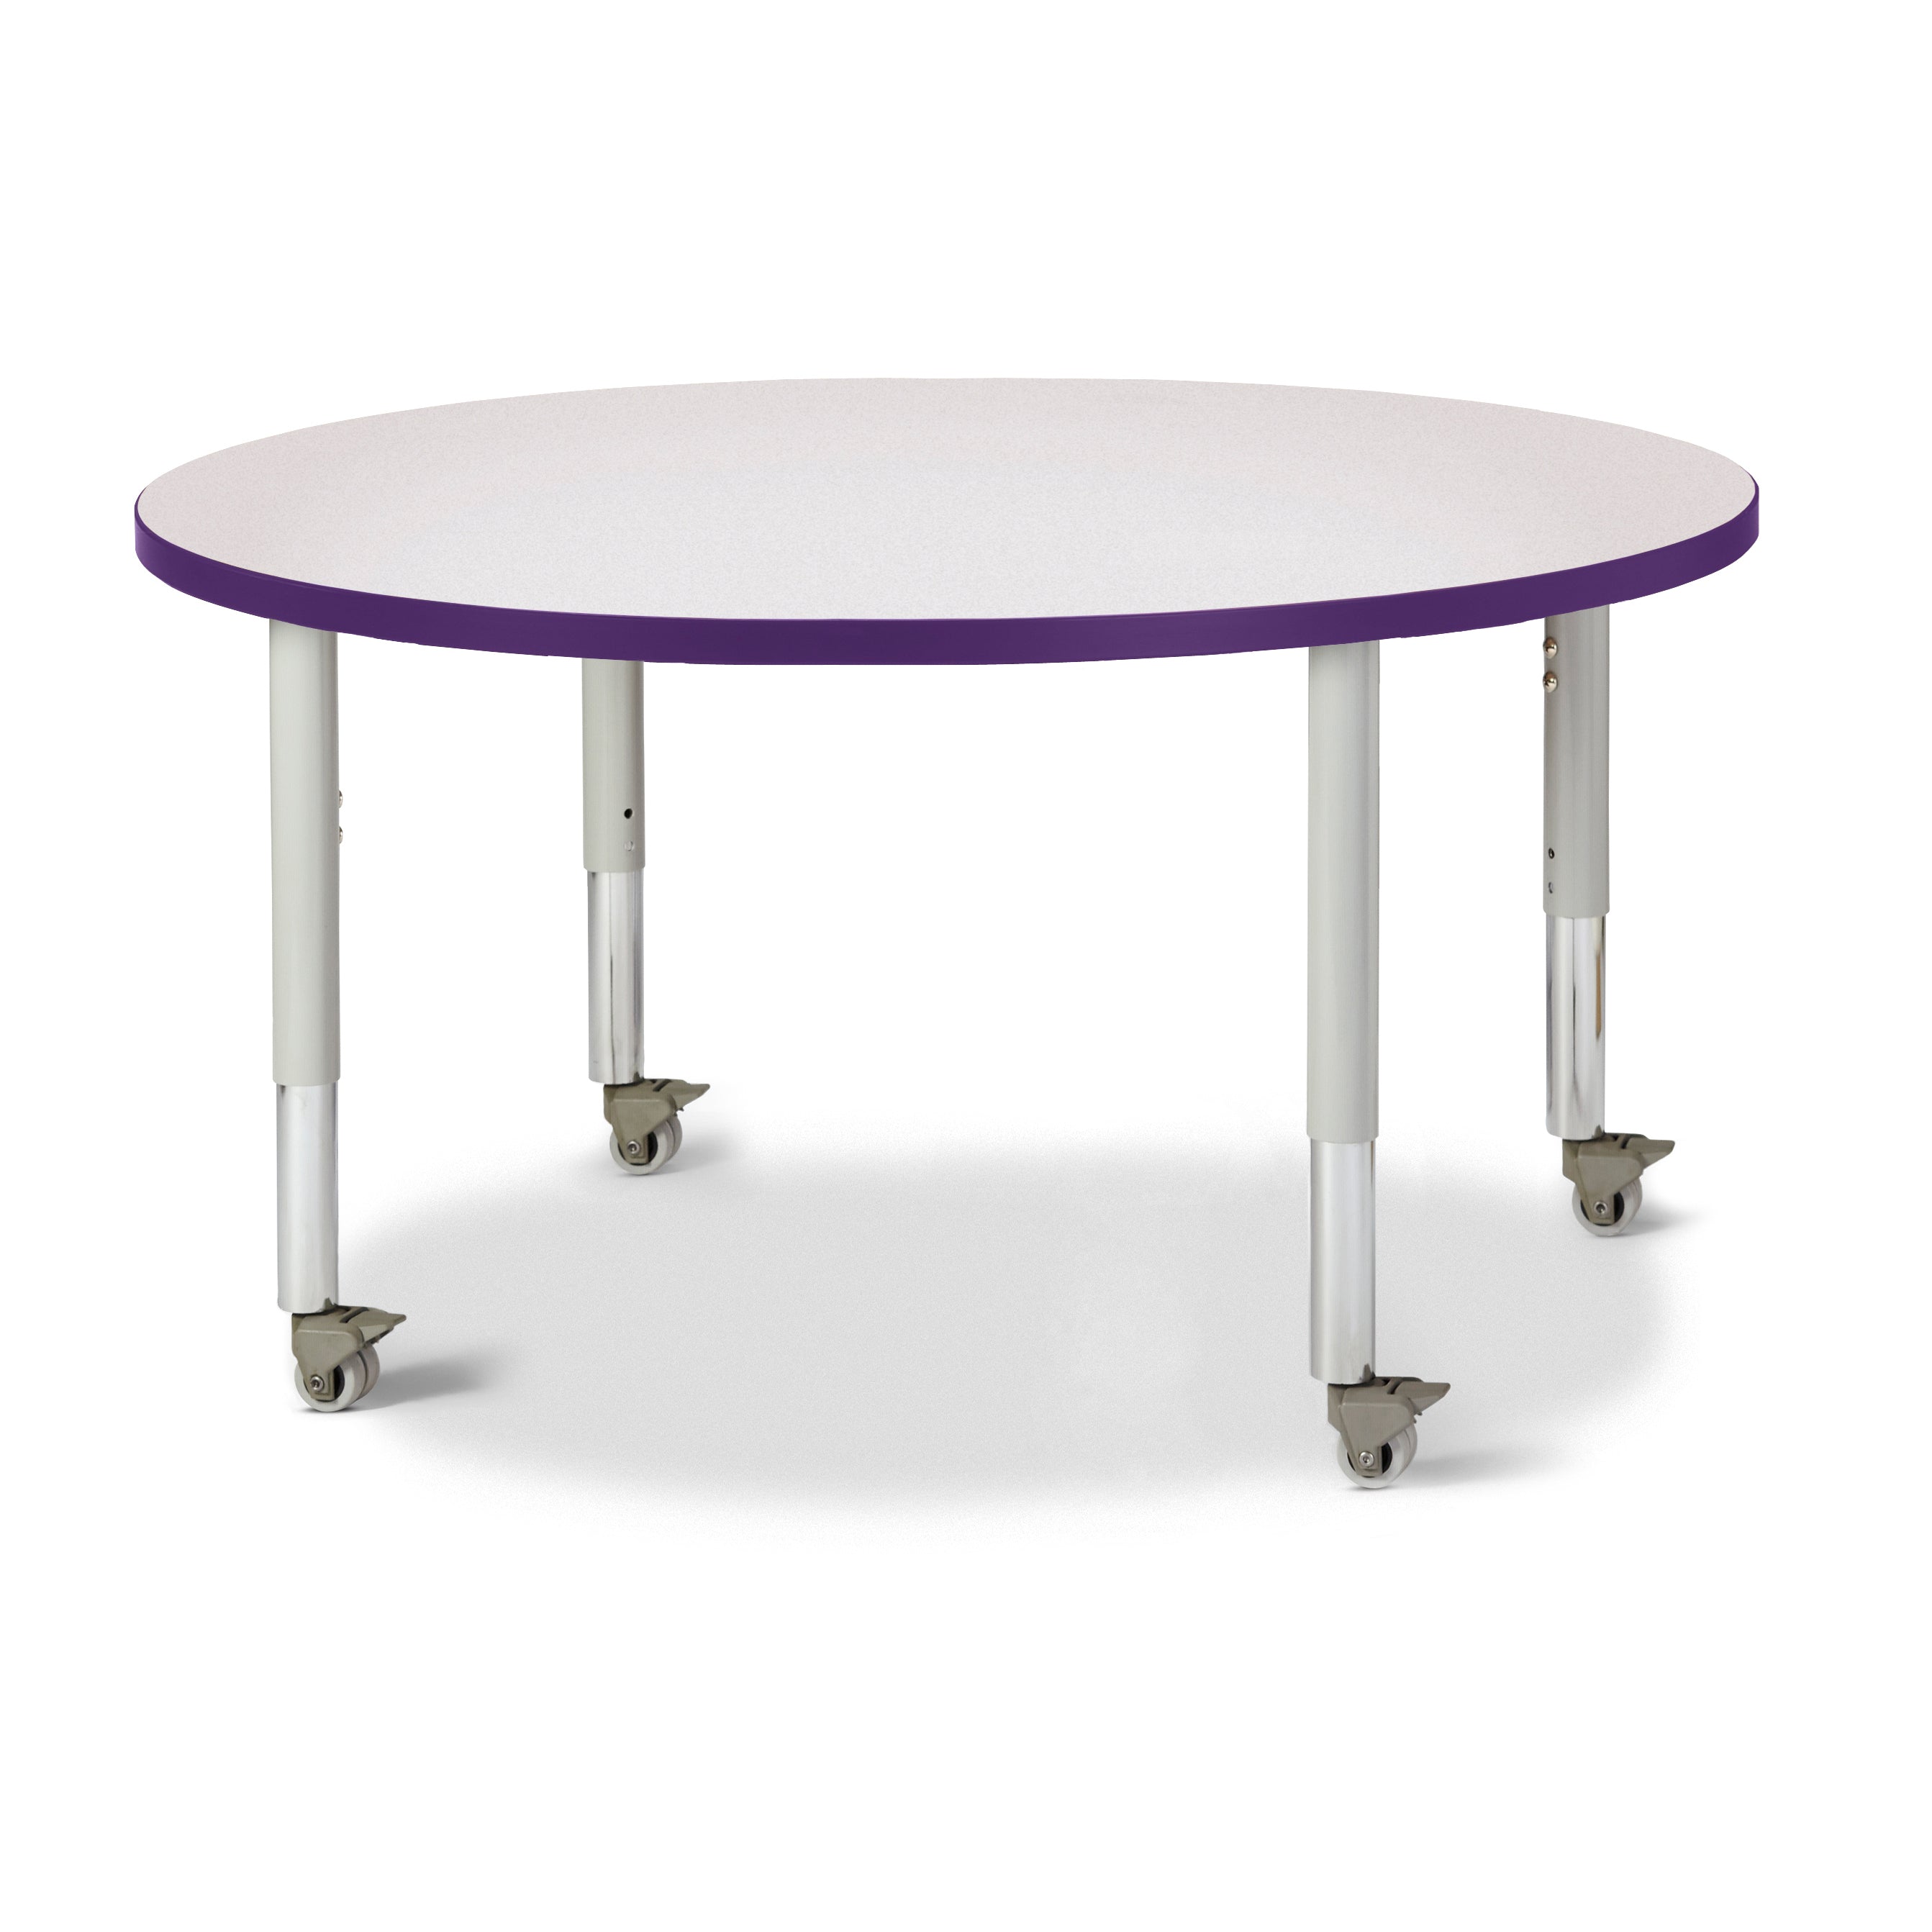 6468JCM004, Berries Round Activity Table - 42" Diameter, Mobile - Freckled Gray/Purple/Gray